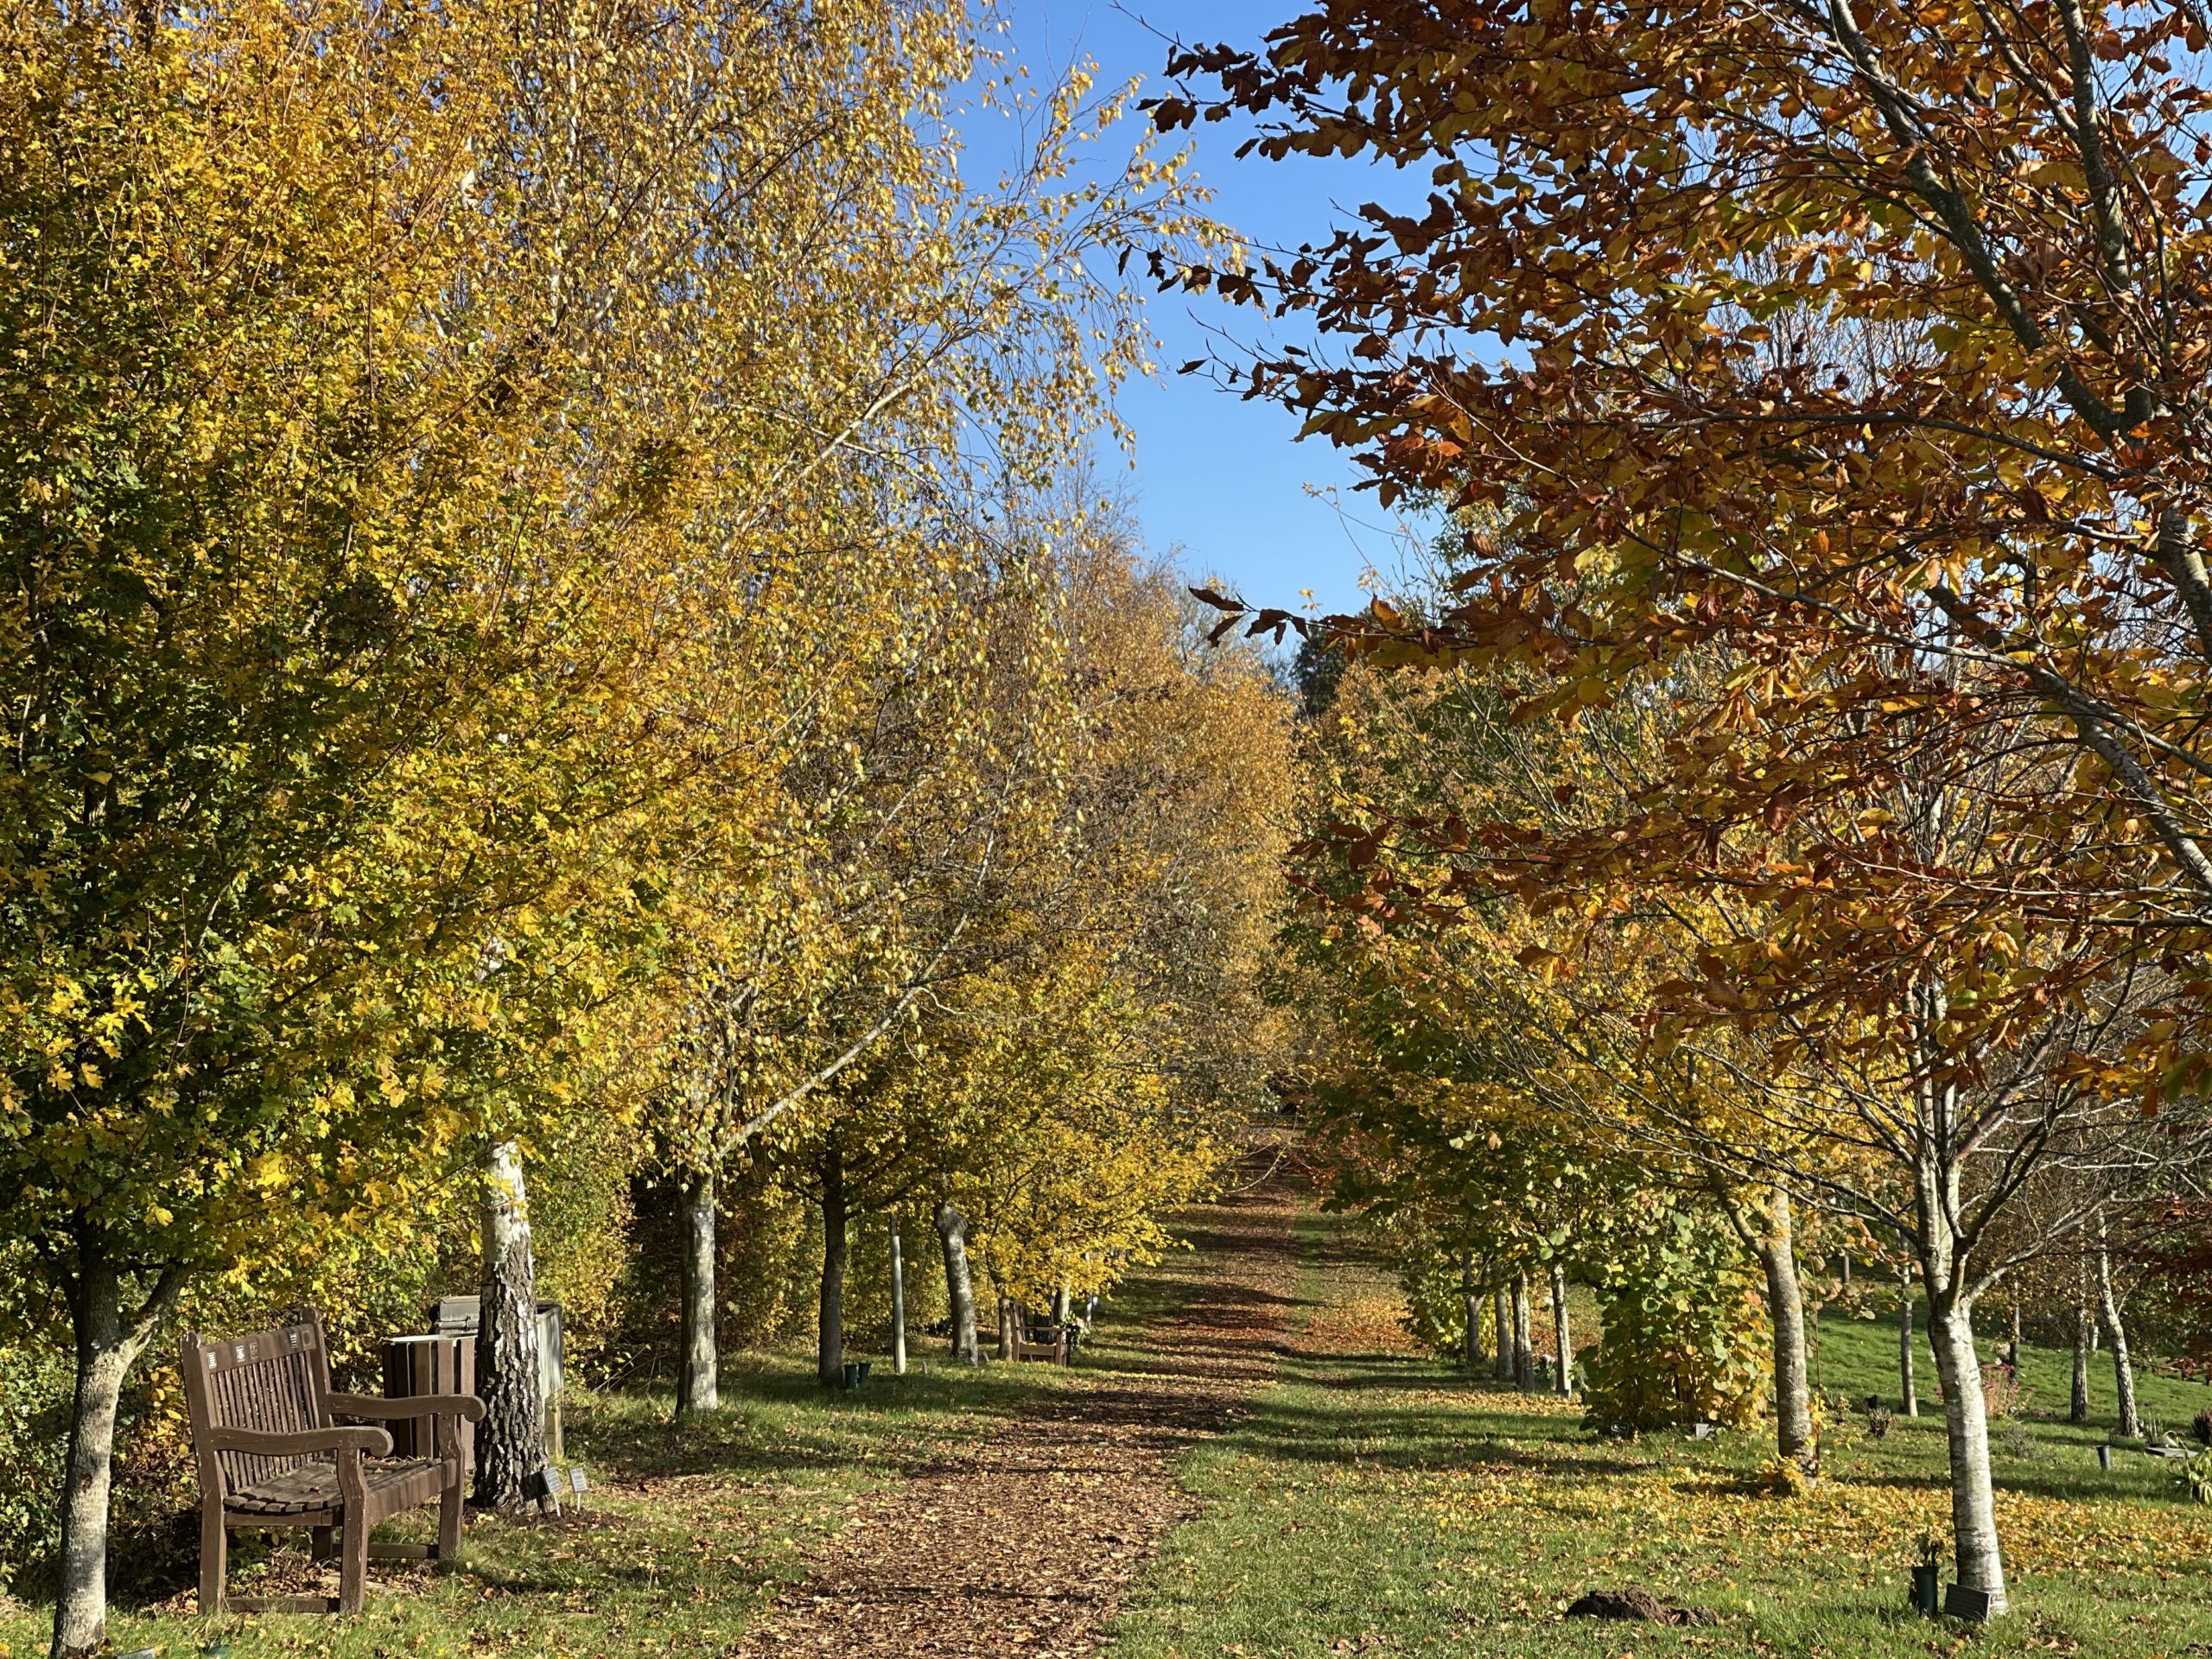 A path goes through a woodland avenue. The trees are in autumn colours of yellows and oranges. There is a bench on the left of the path. Golden leaves litter the ground beneath the trees.